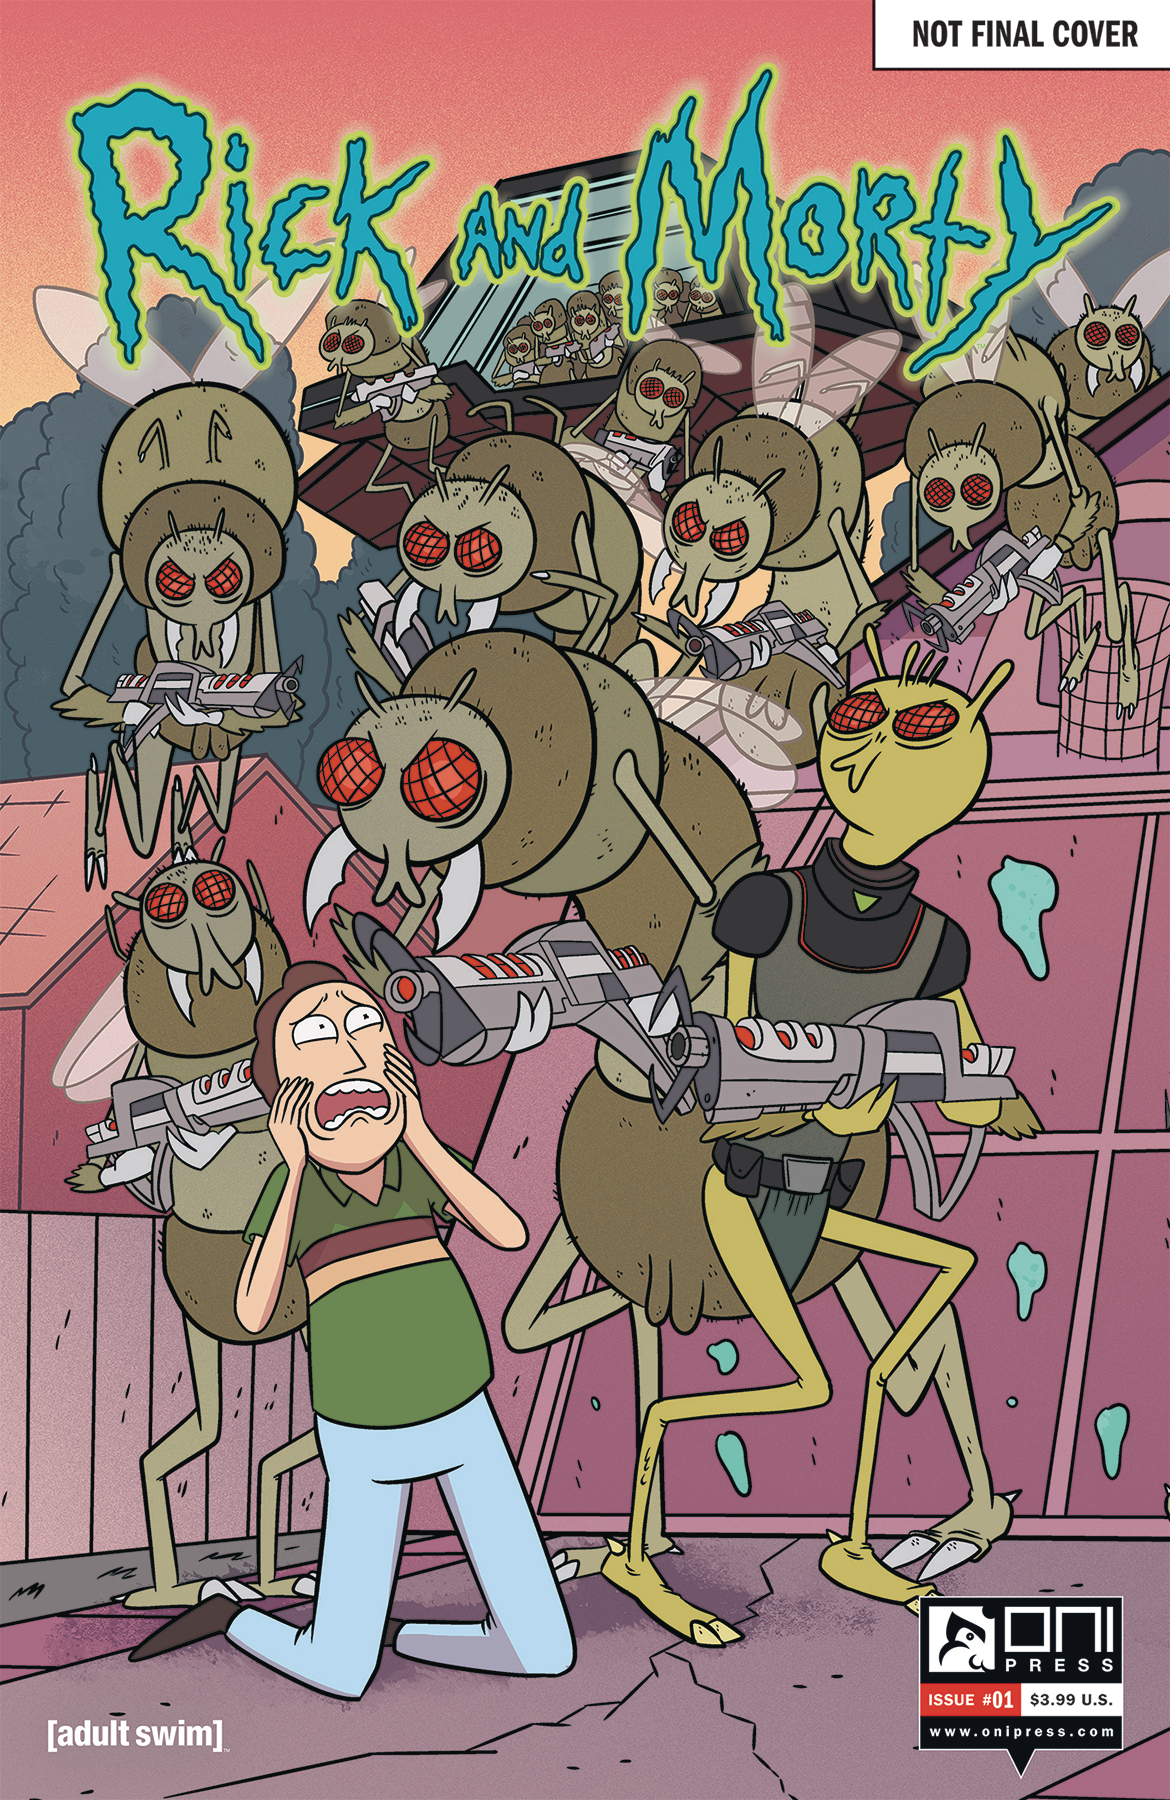 RICK & MORTY #1 50 ISSUES SPECIAL VAR